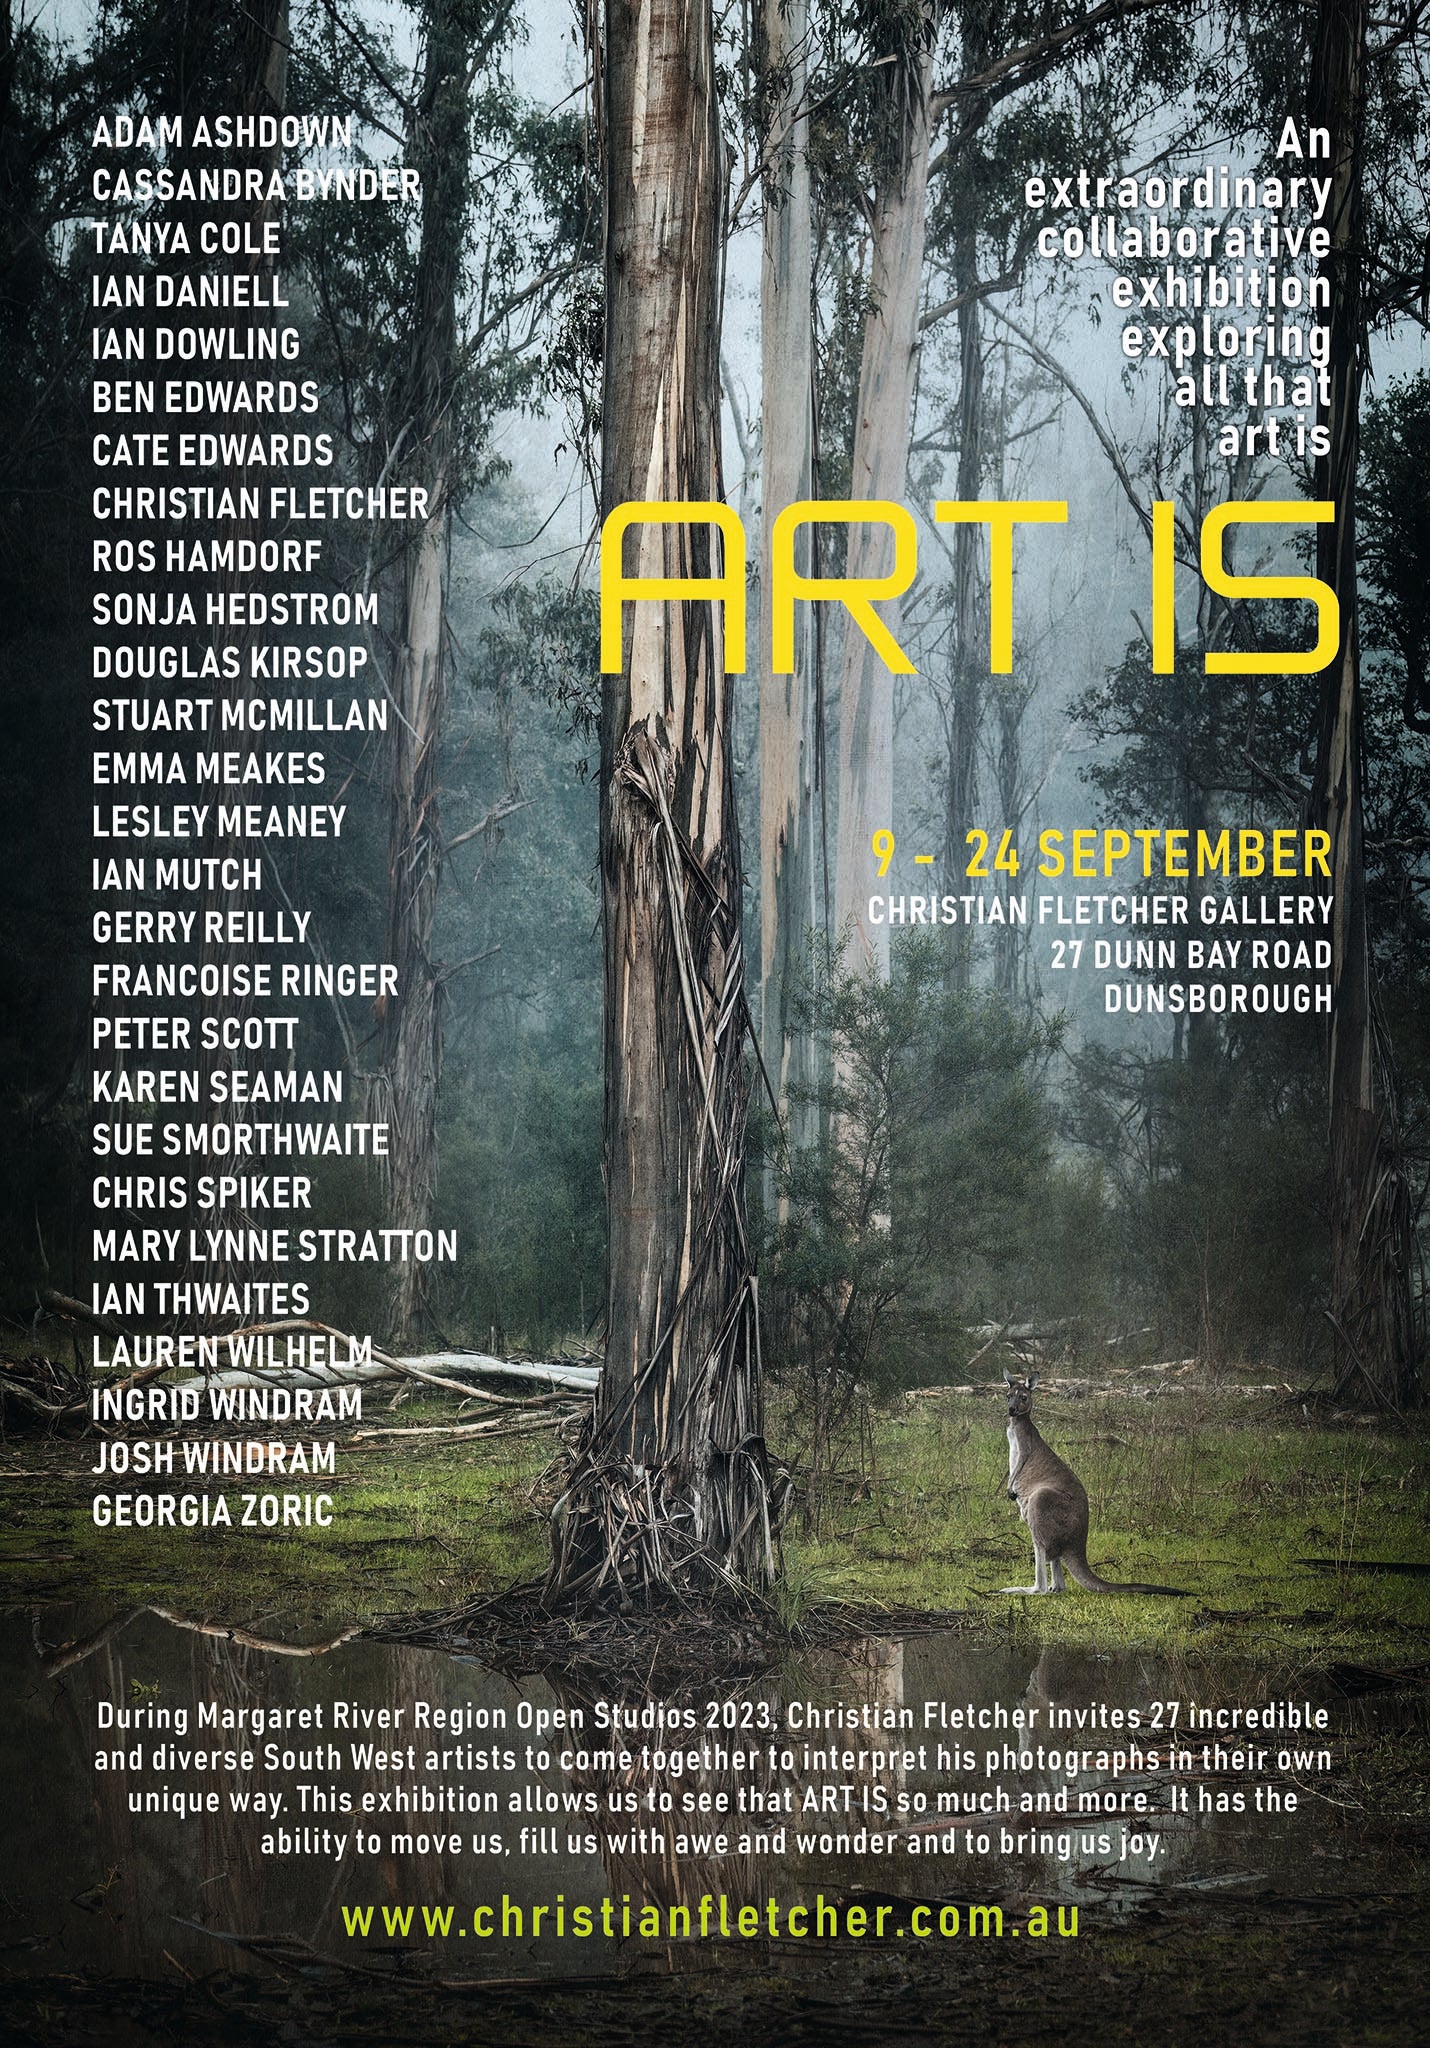 Poster of a collaborative exhibition by Christian Fletcher and 26 South West artists, during the Margaret River Region Open Studio event.